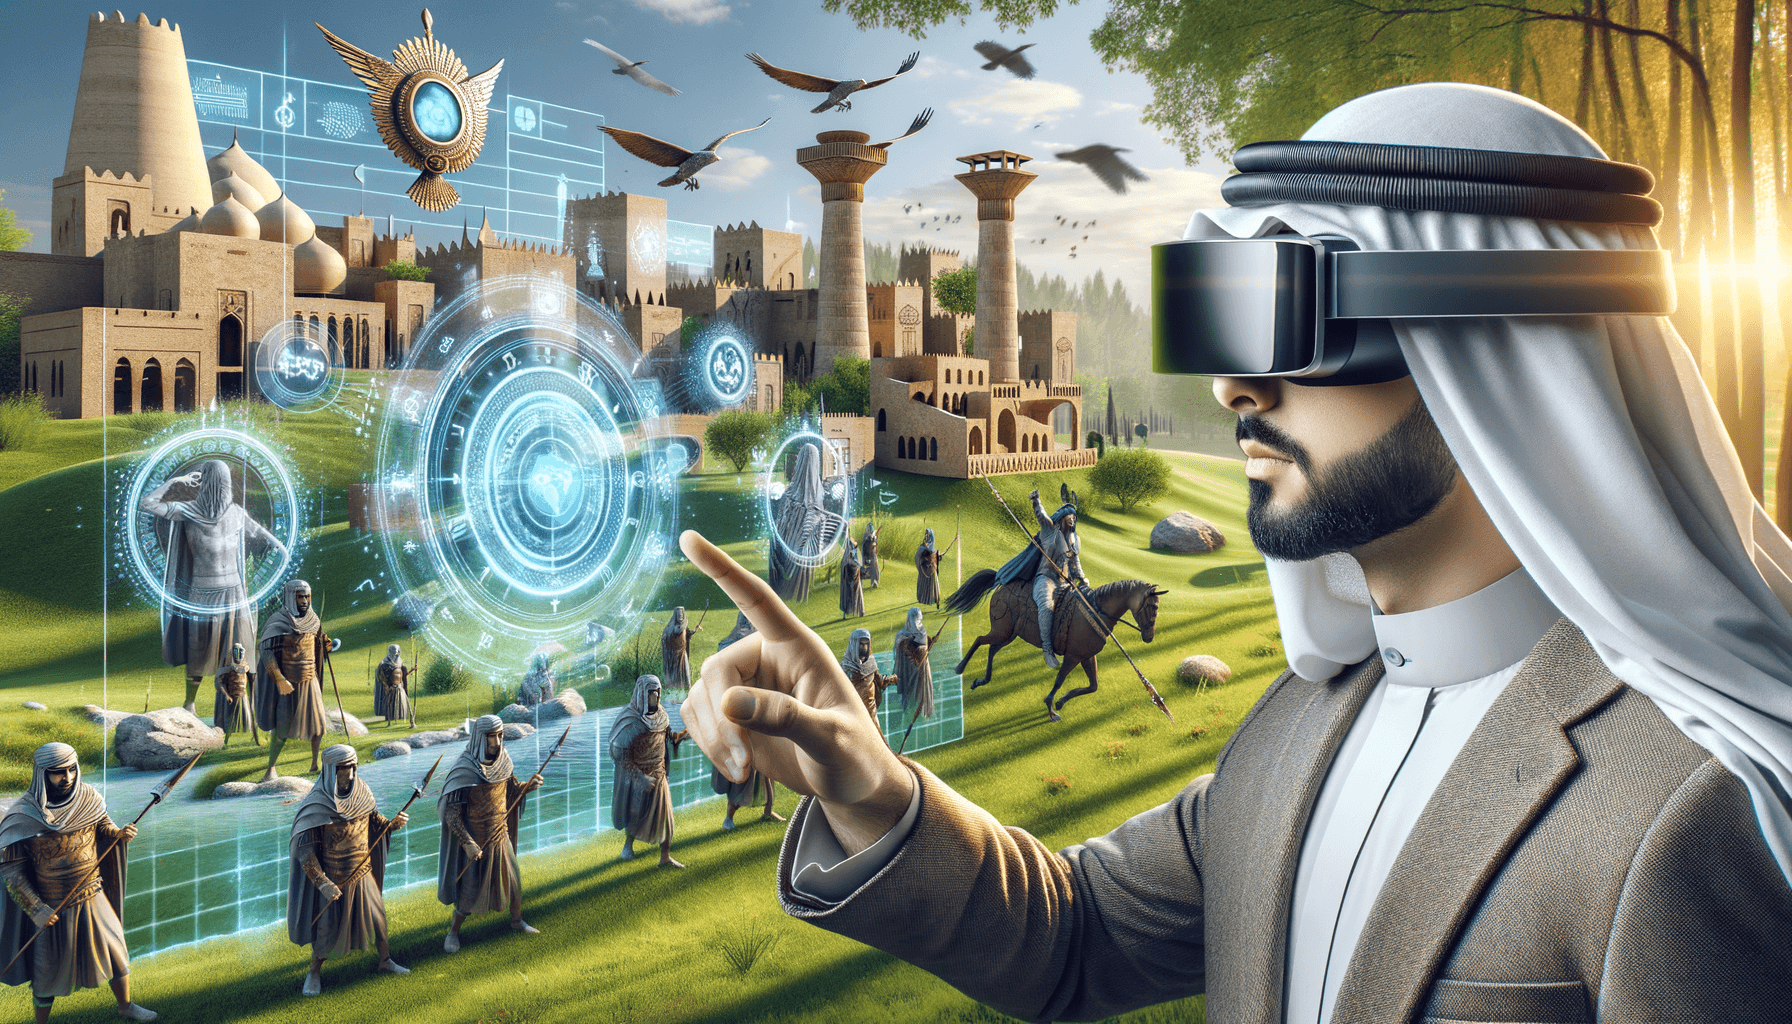 "Revolutionary AR Gaming Experience with Apple Vision Pro and Gravity Jack's WarTribe of Binyamin – Adventure Meets History in Your Local Park."